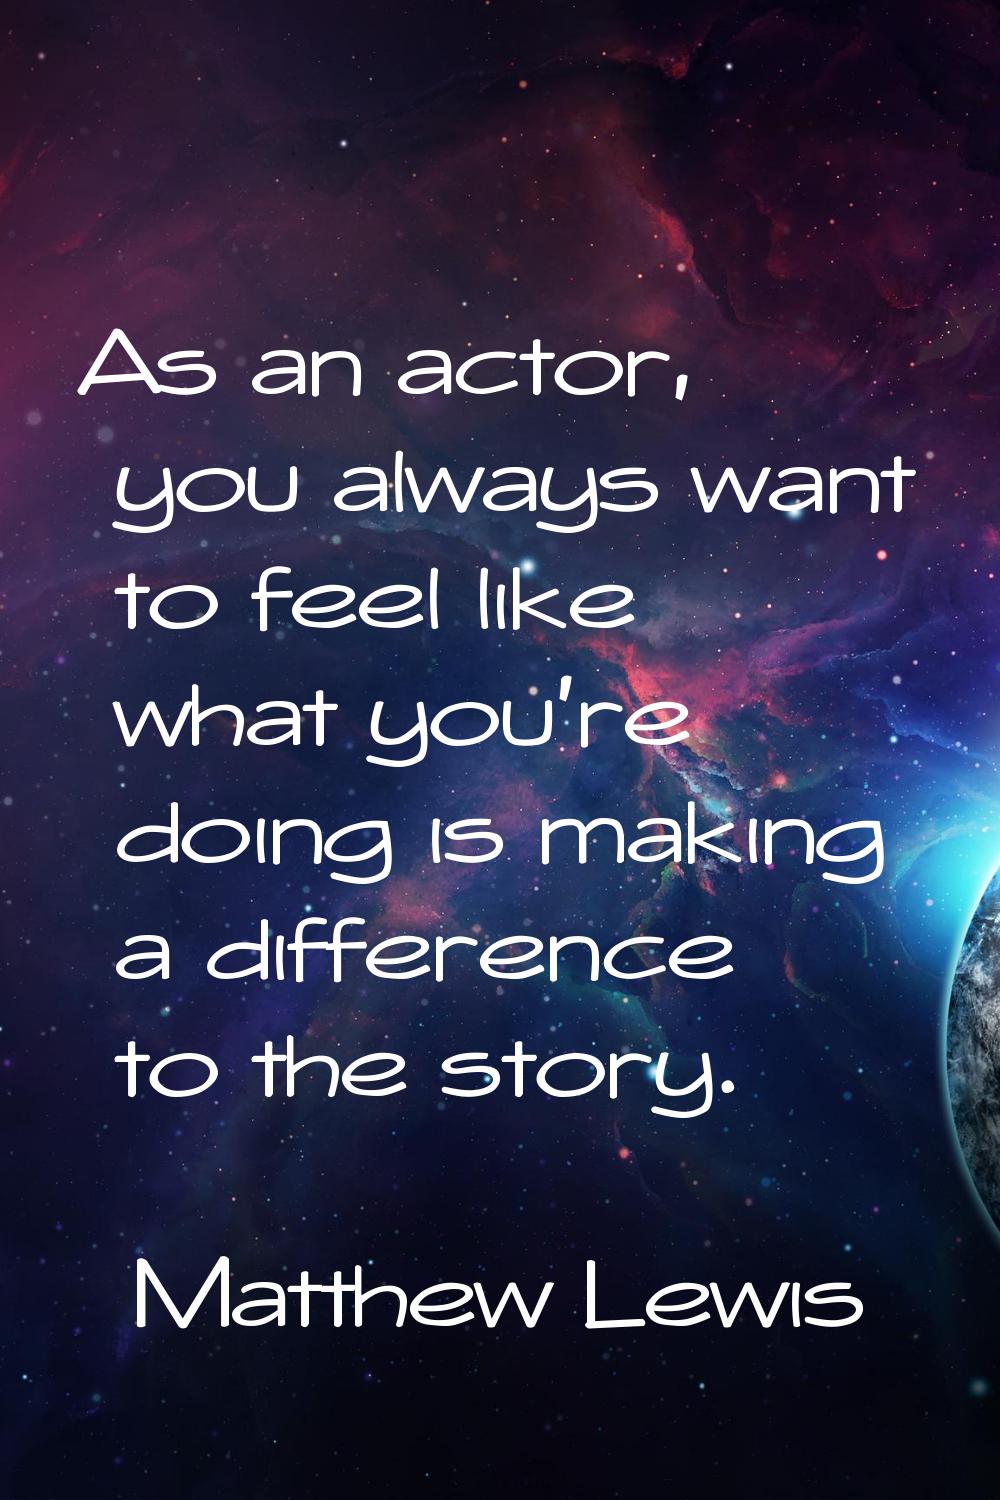 As an actor, you always want to feel like what you're doing is making a difference to the story.